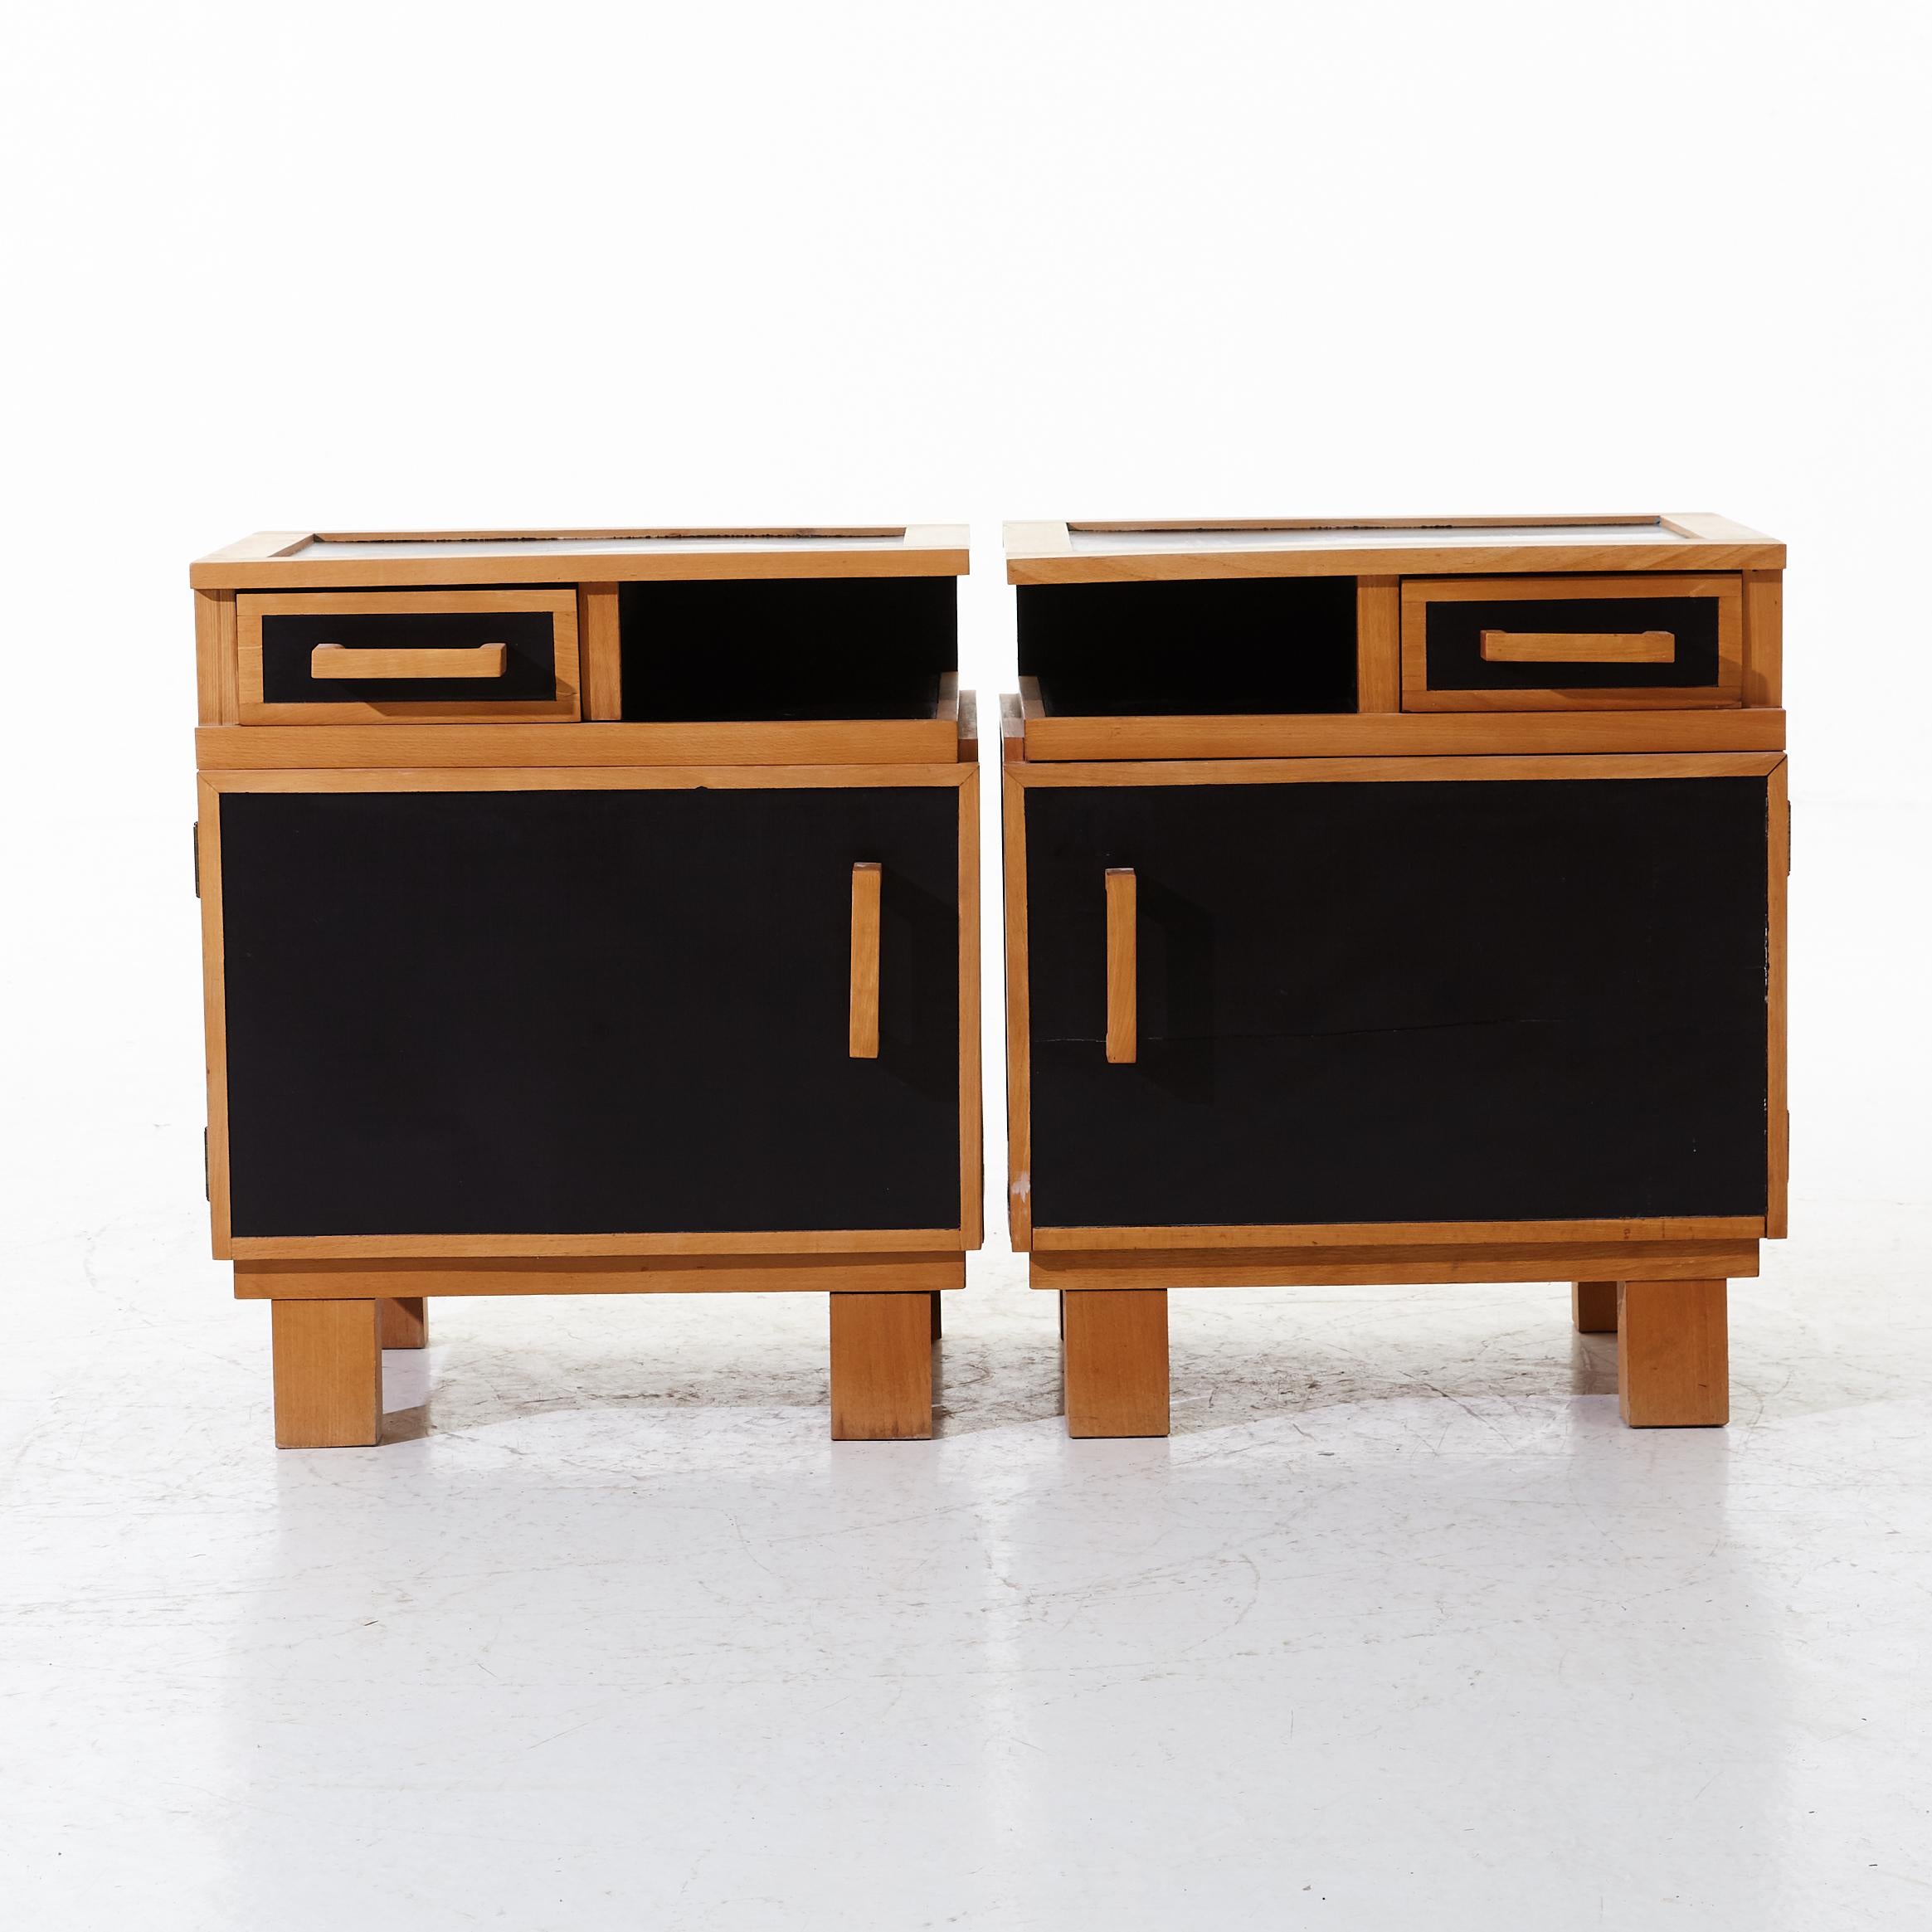 Finnish beside furniture in the manner of Alvar Aalto designed and produced during the 1950s in Finland.